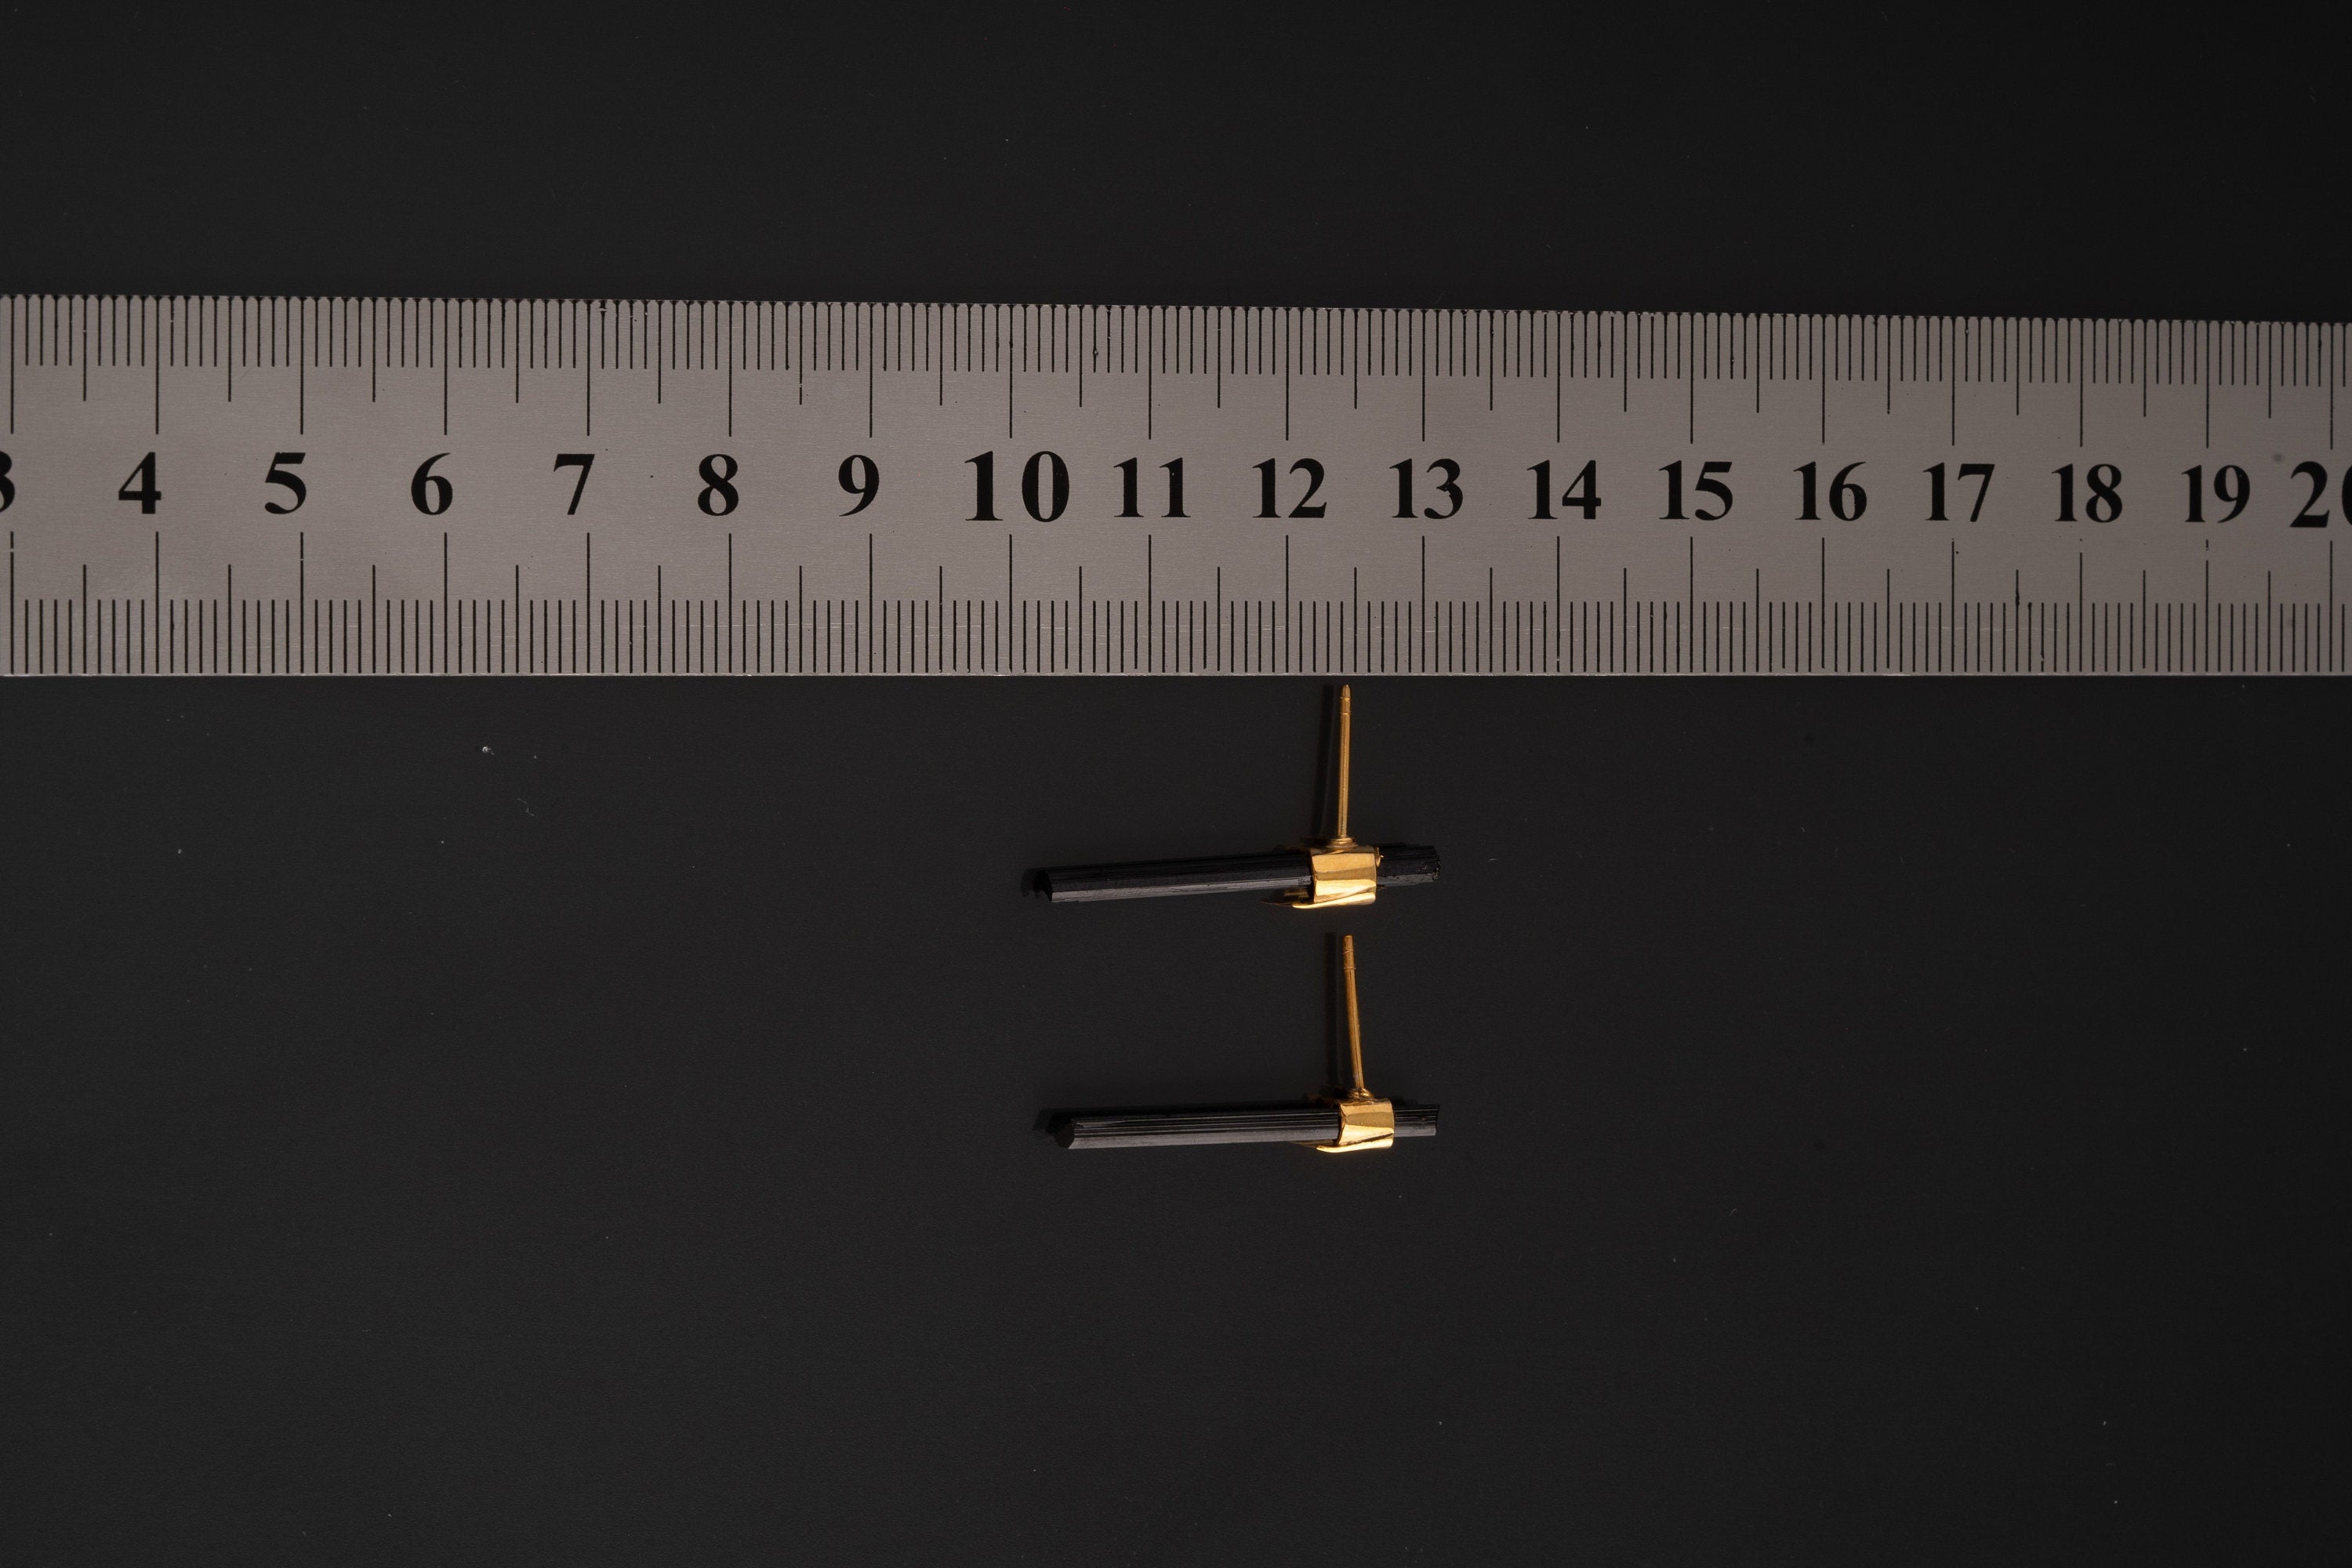 Black Tourmaline Needle - 16k Dold plated - 925 Sterling Silver- Non Allergic Backing - Pair of Earring Pin Studs